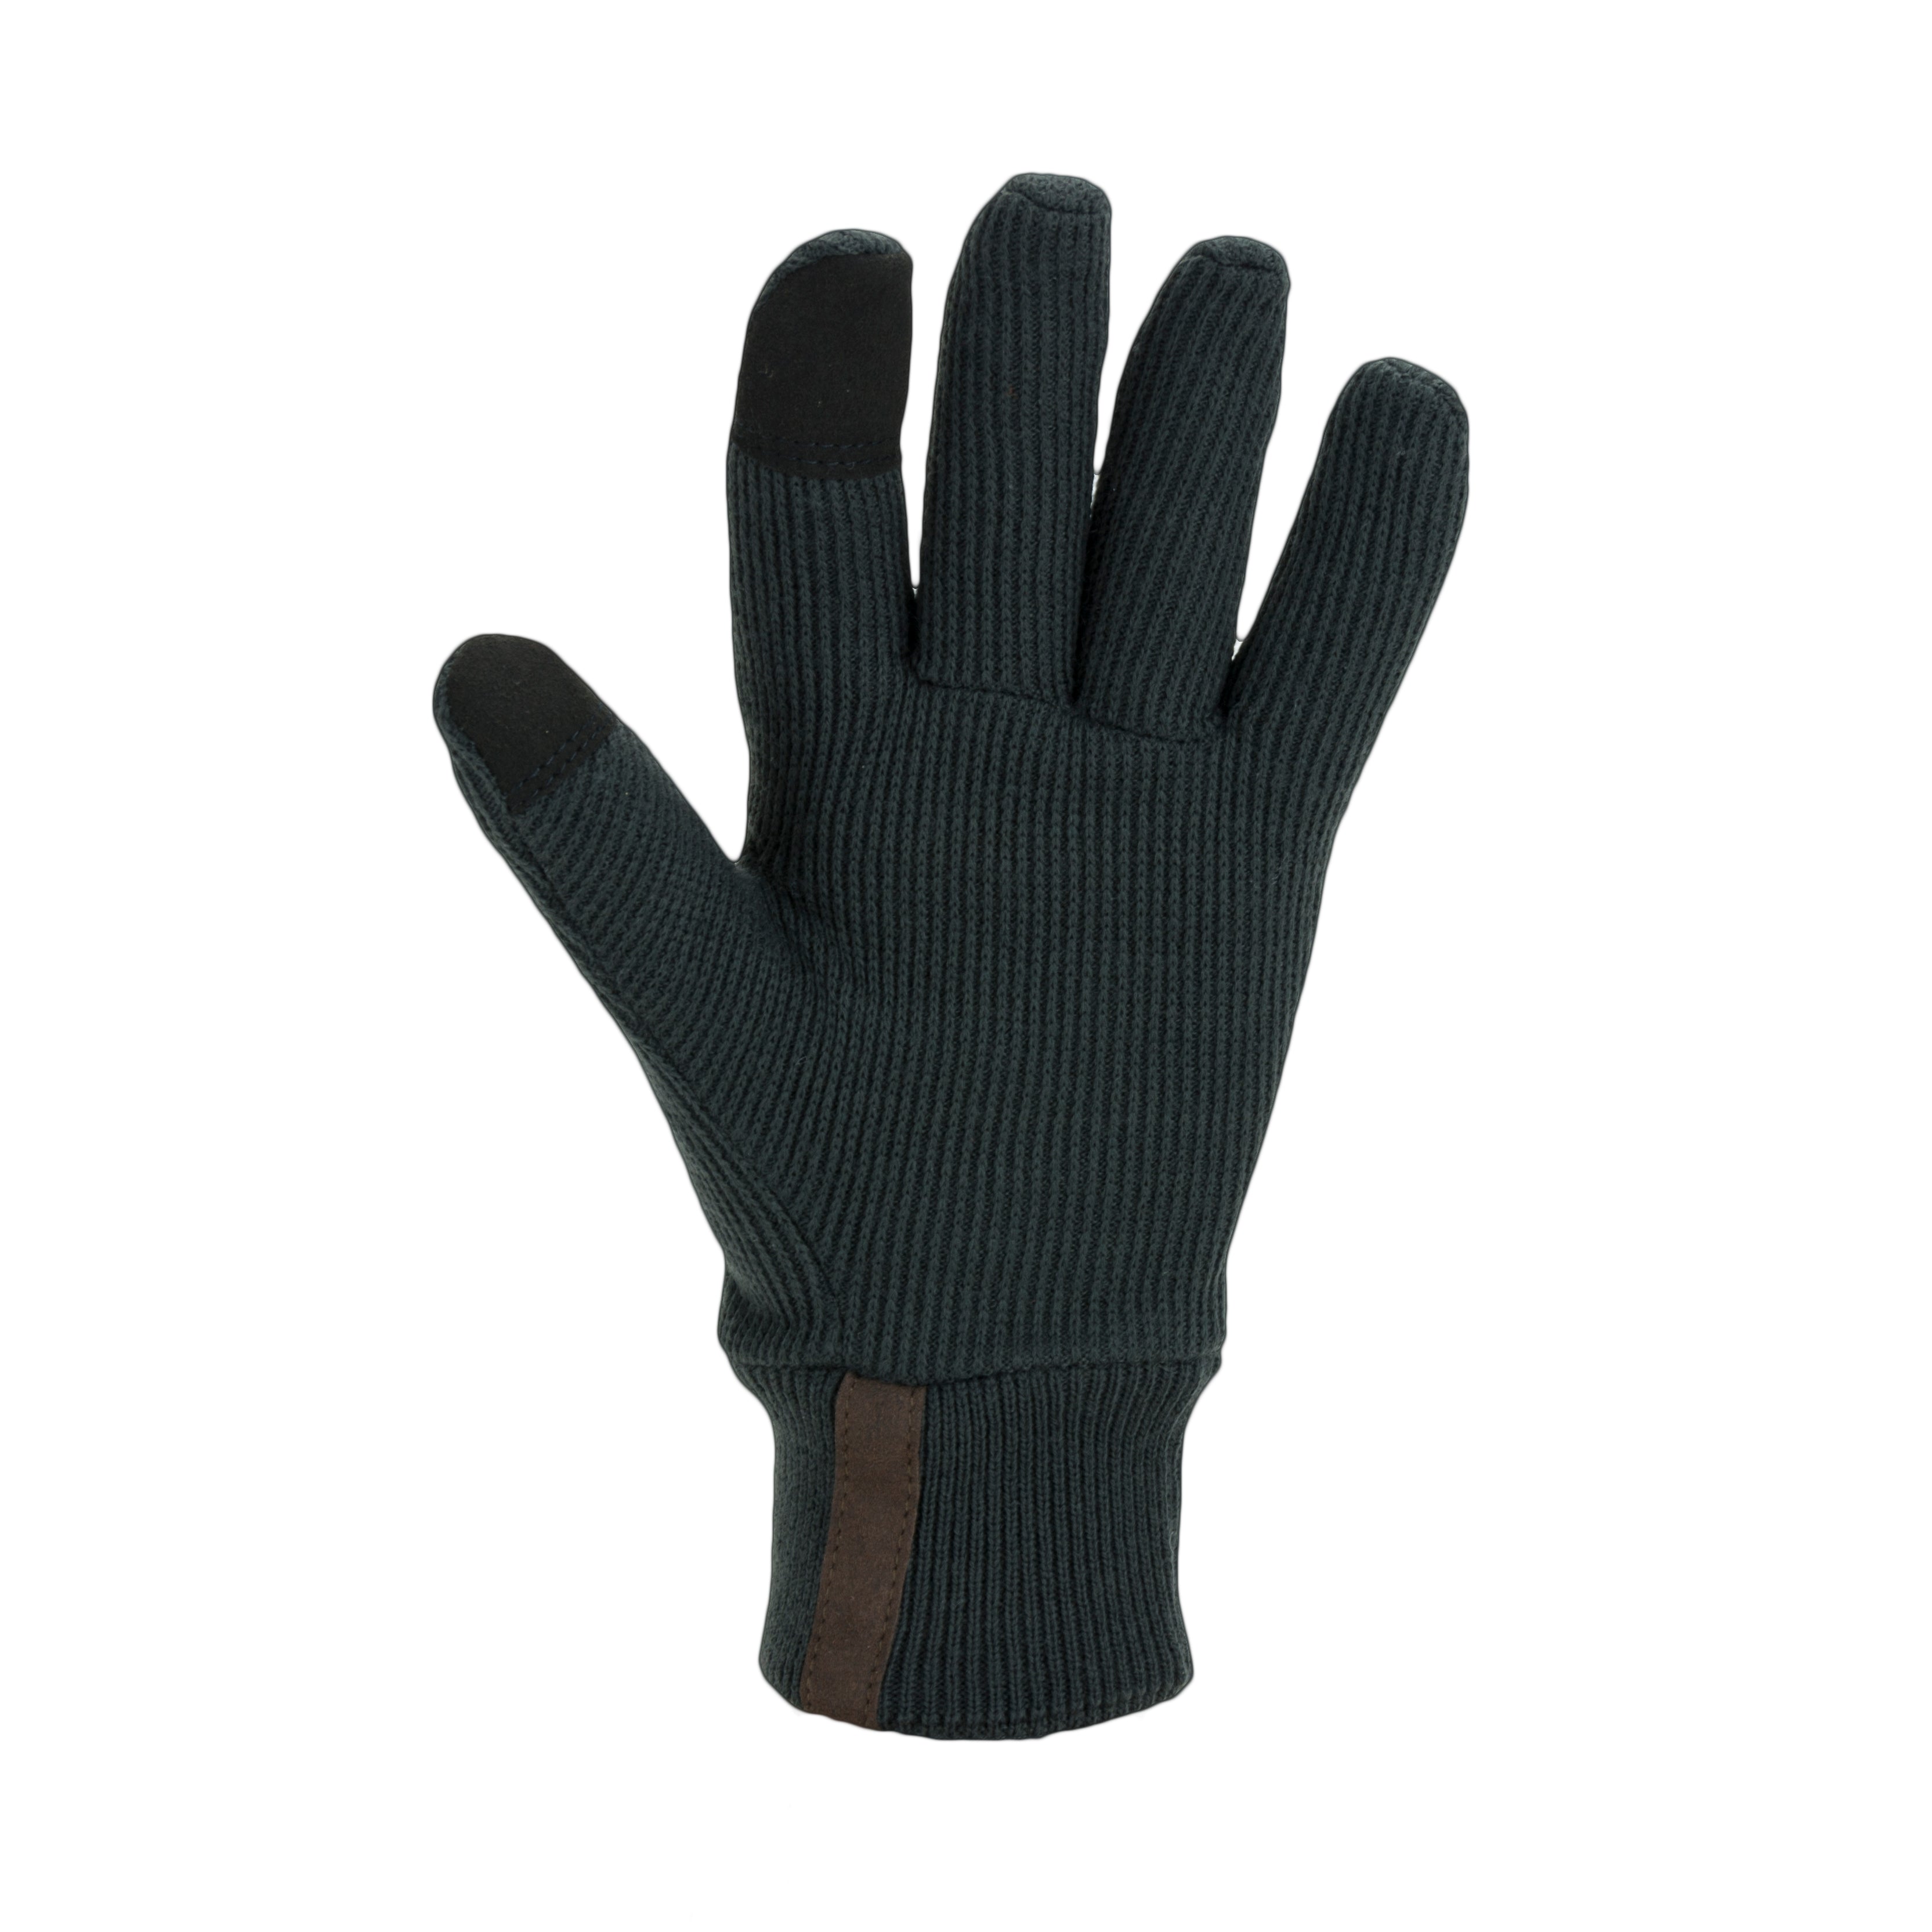 Windproof All Weather Knitted Glove - Size: S, M, L, XL - Color: Black, Grey, Dark Navy, Red